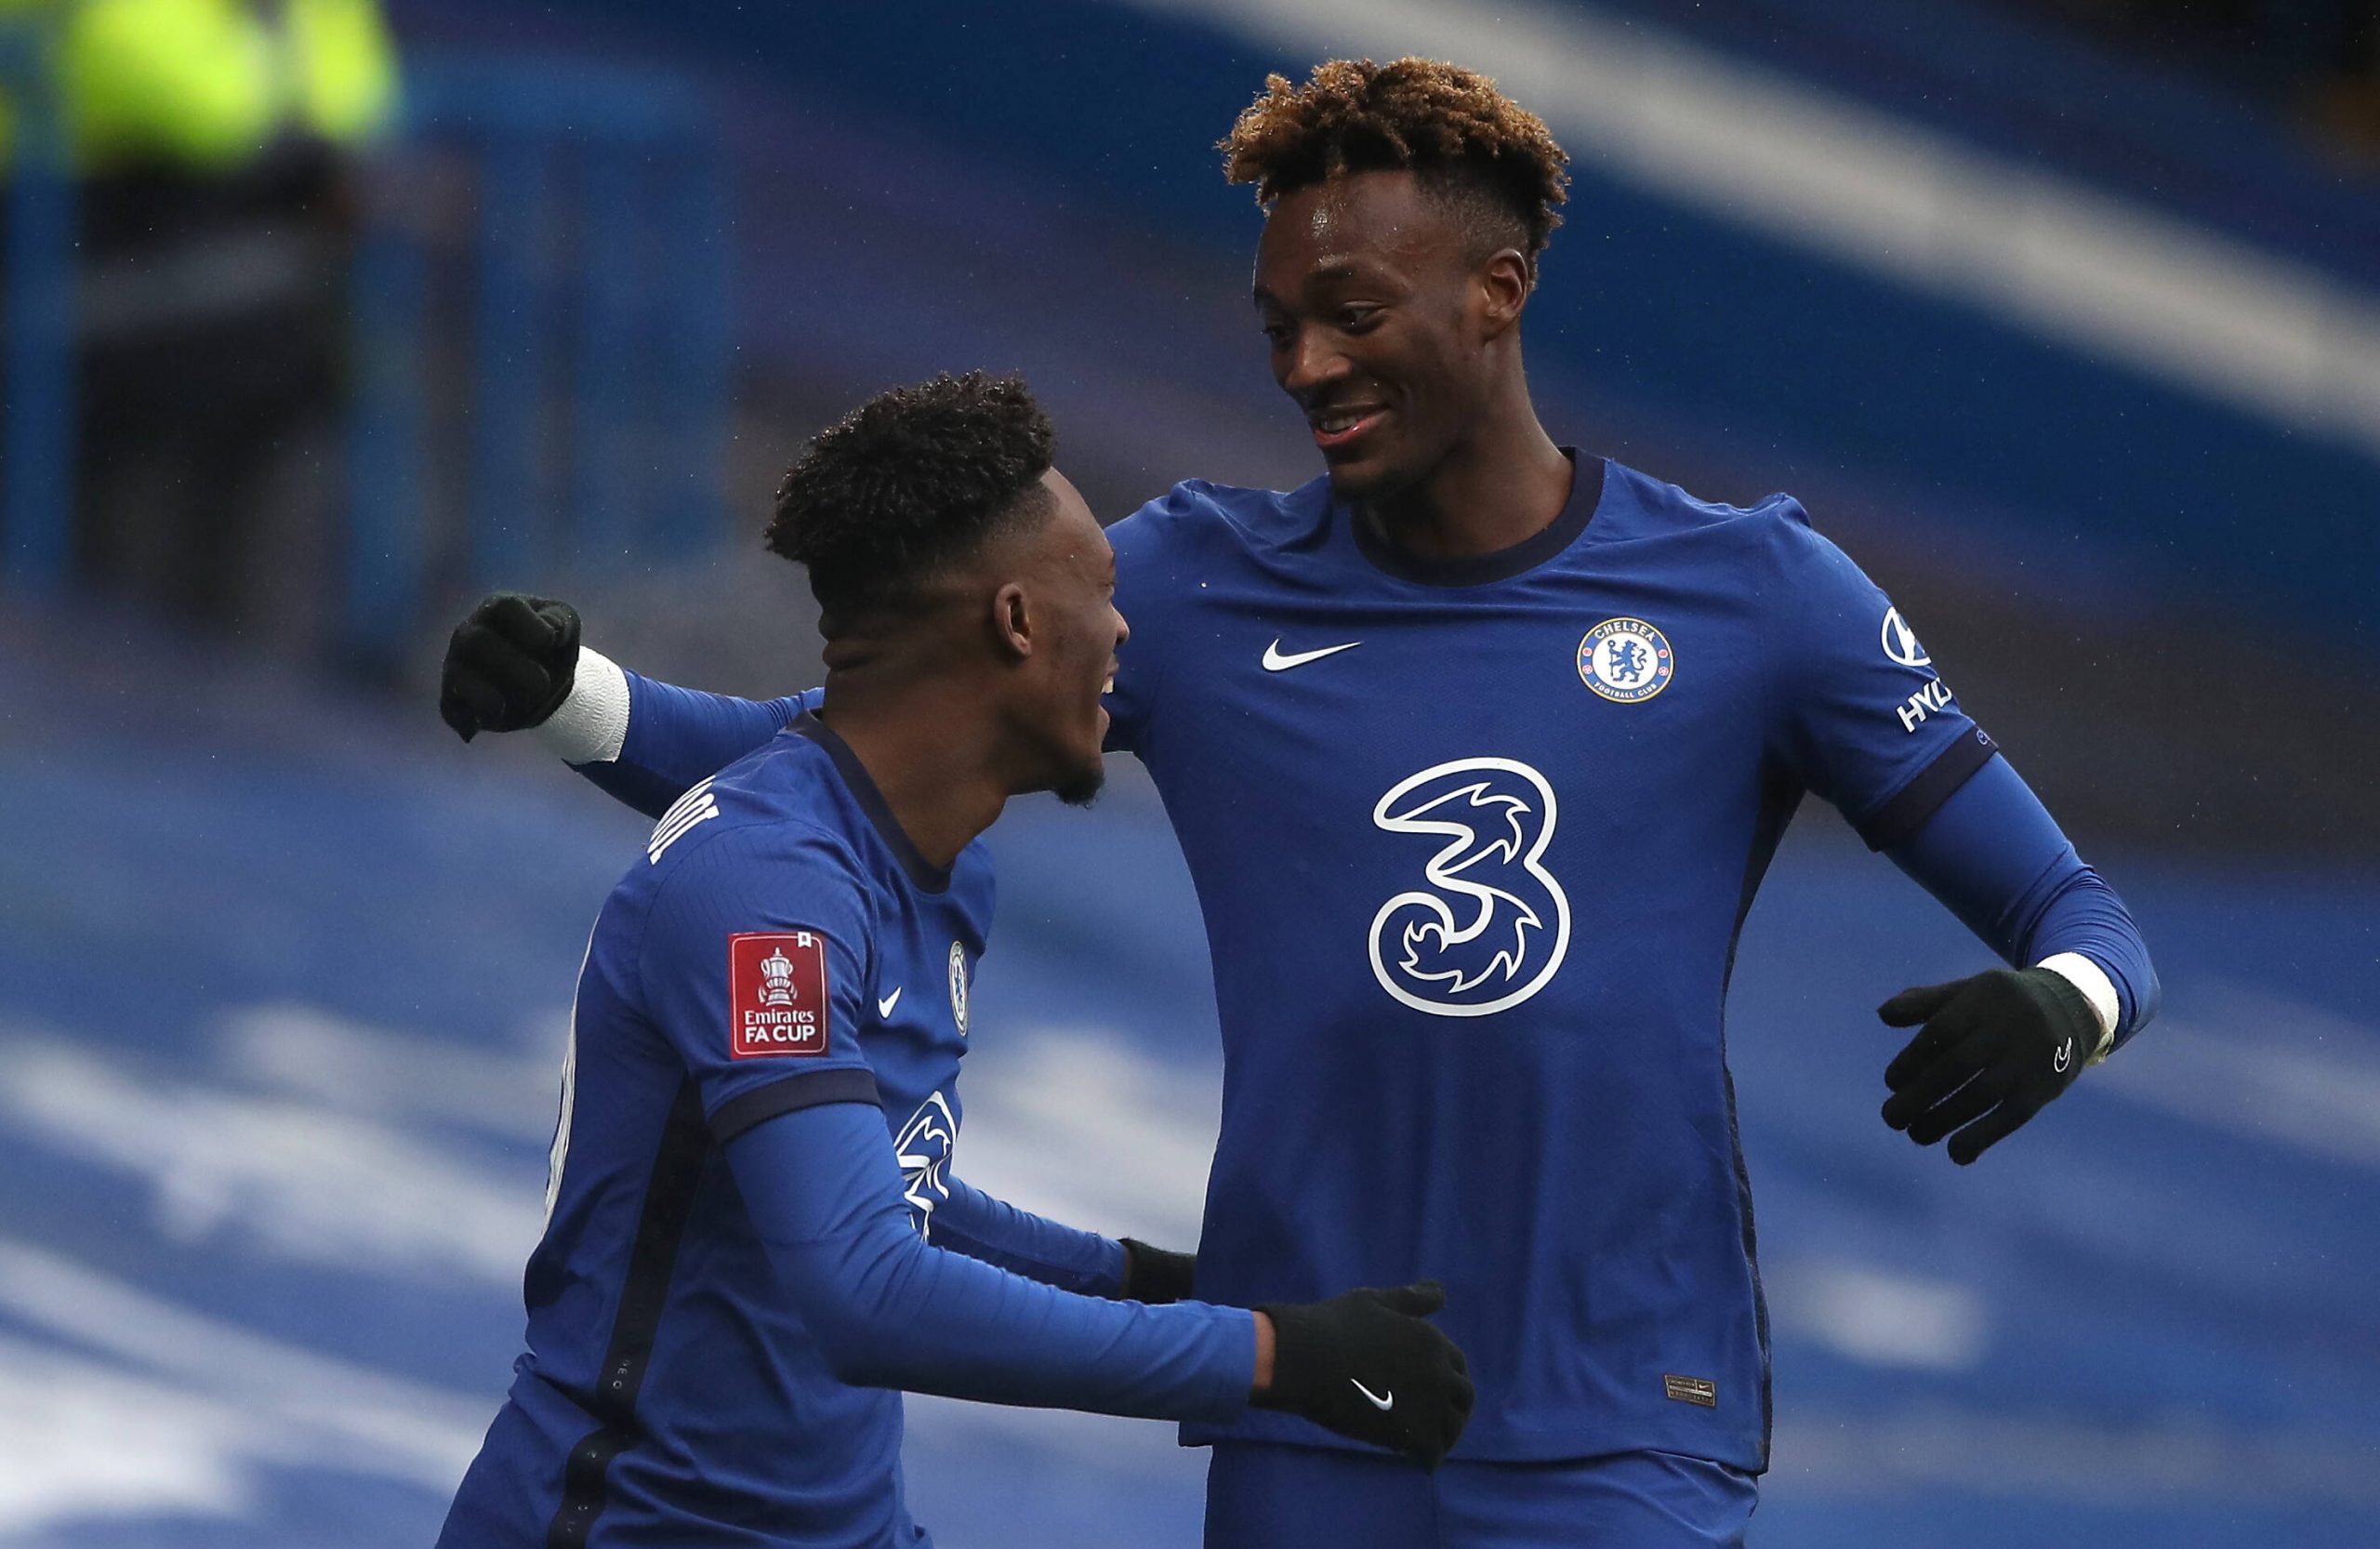 Callum Hudson-Odoi and Tammy Abraham in action for Chelsea against Luton Town. (imago Images)